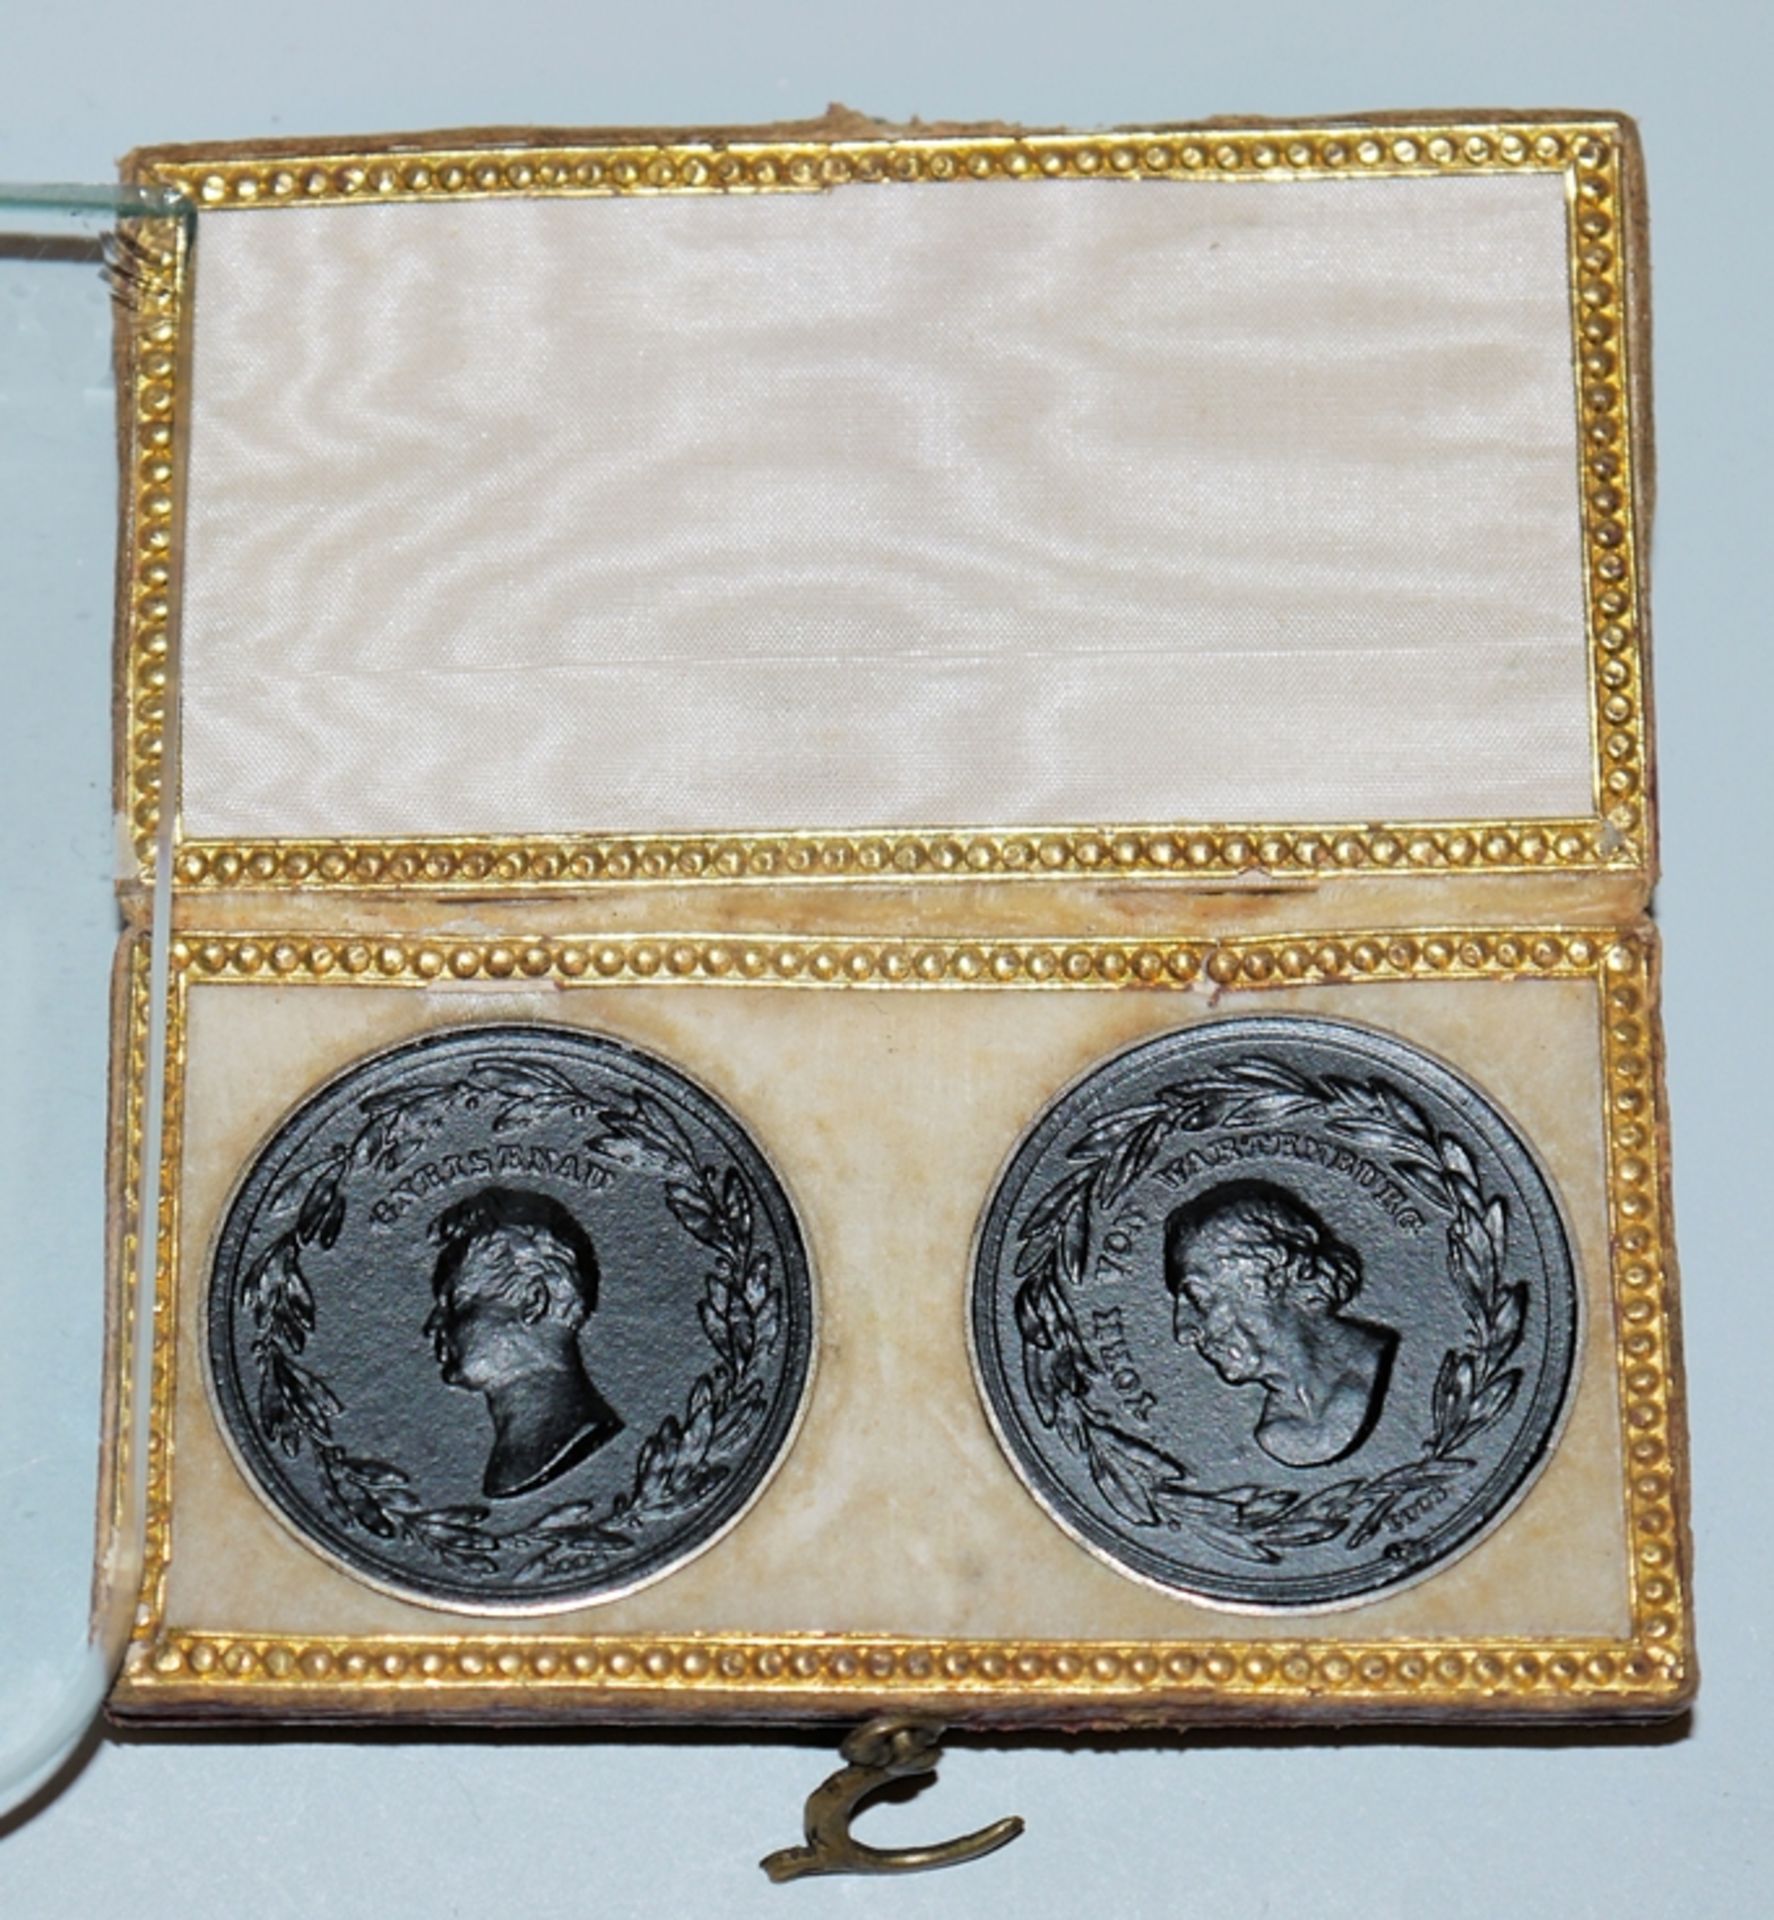 Four medals - Prussian military leaders, Berlin iron, medallist D. F. Loos, 1815, in original case